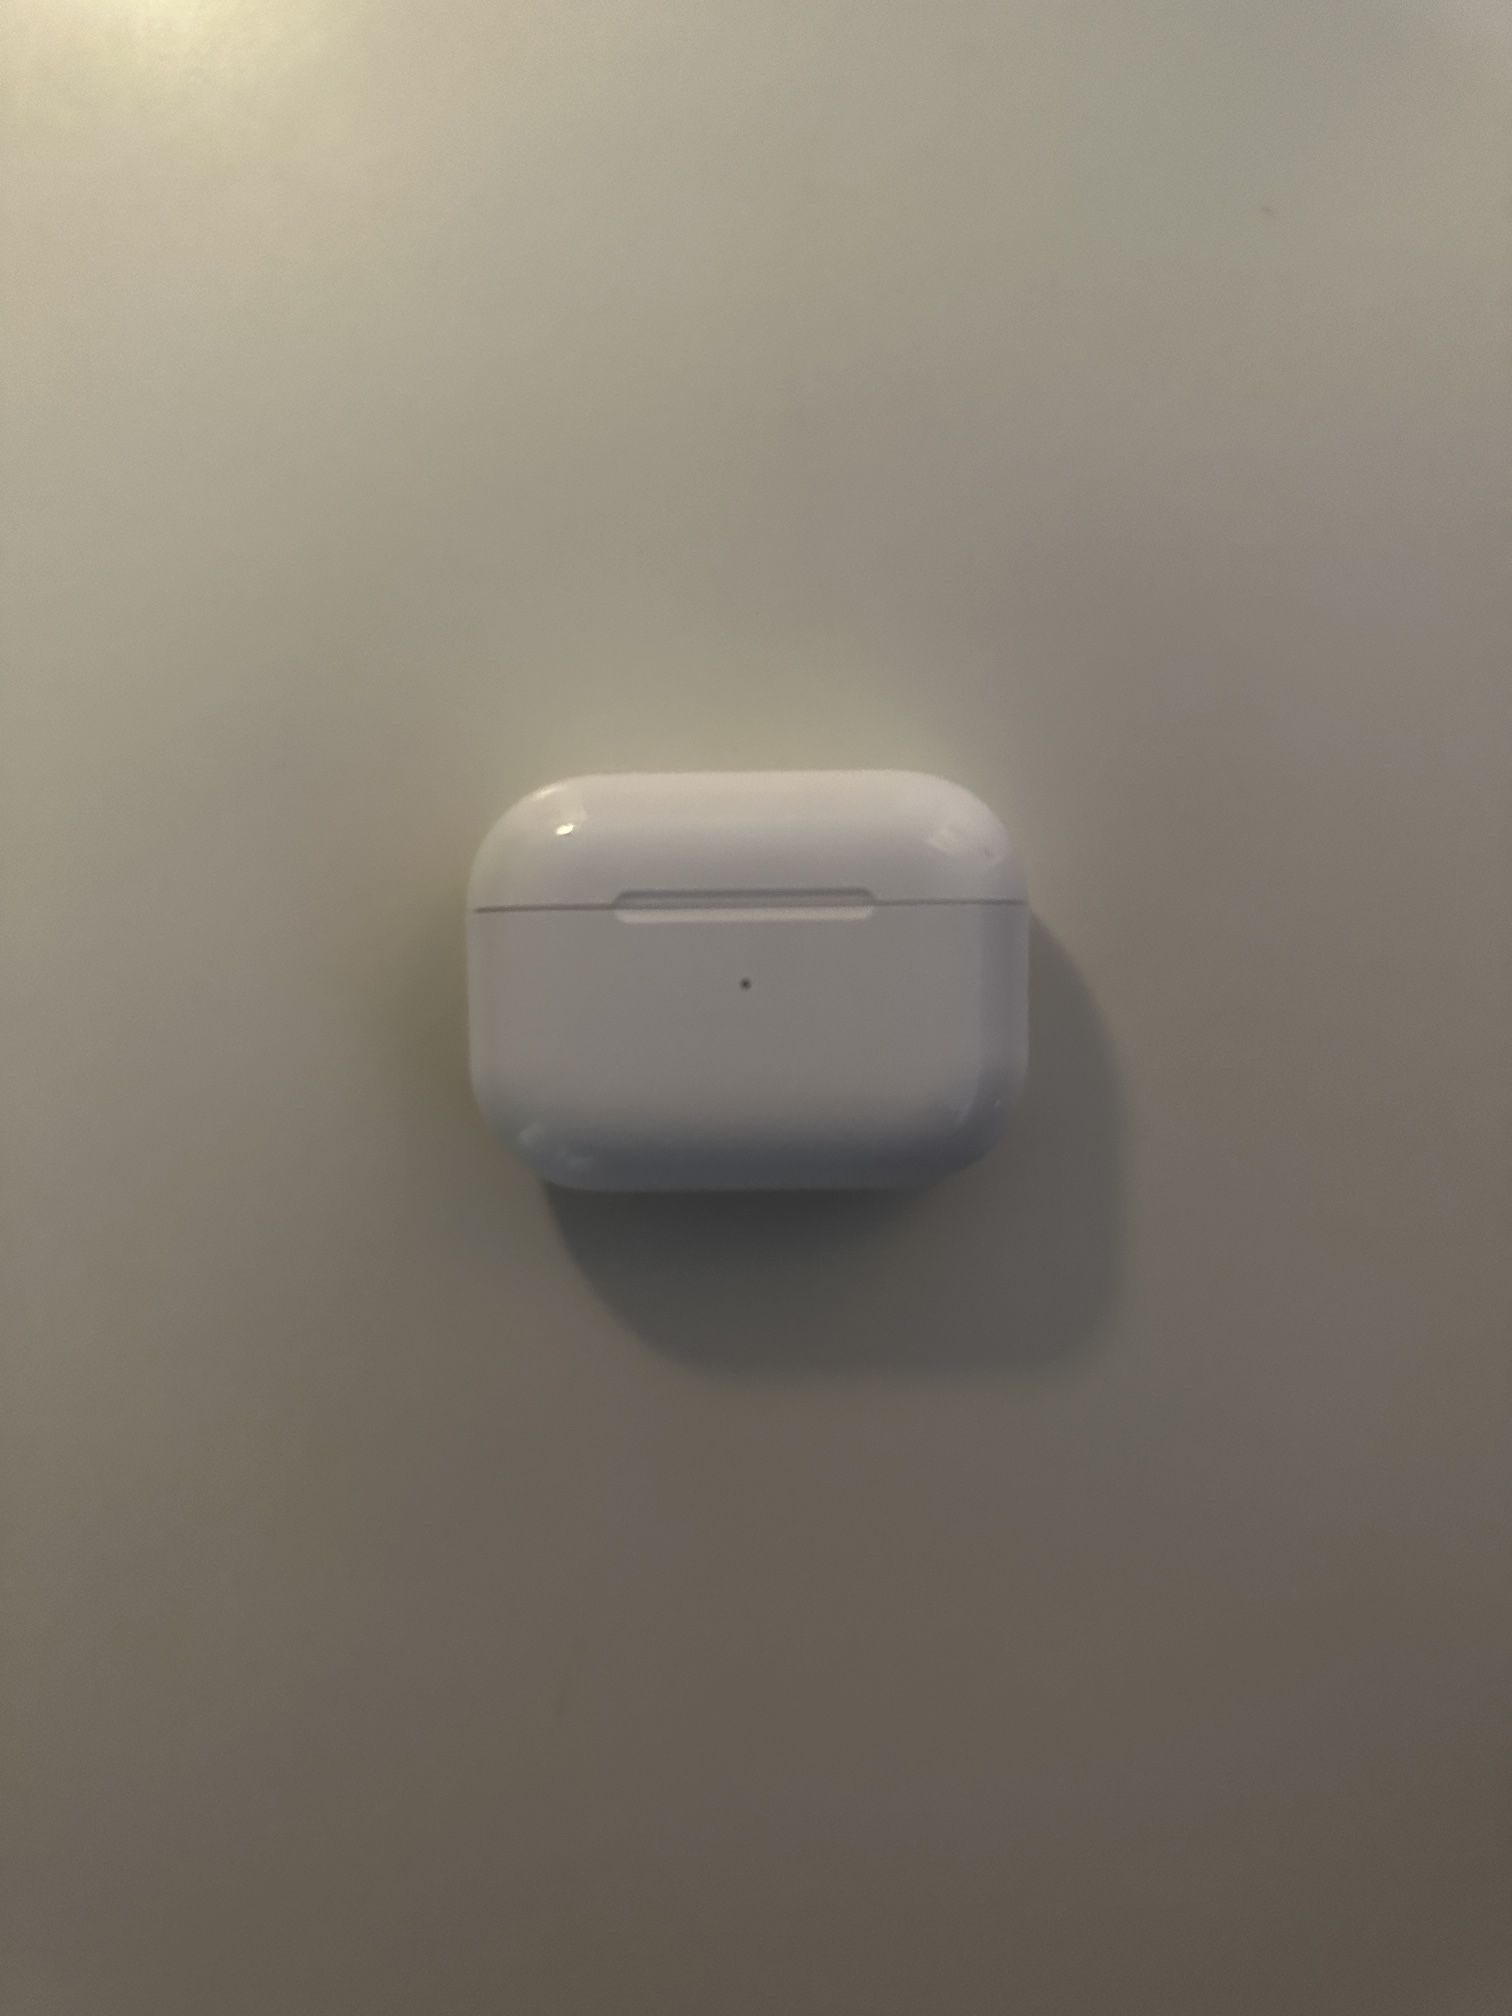 *Send An Offer* Apple AirPods Pro 2nd Generation Bought Off Amazon 